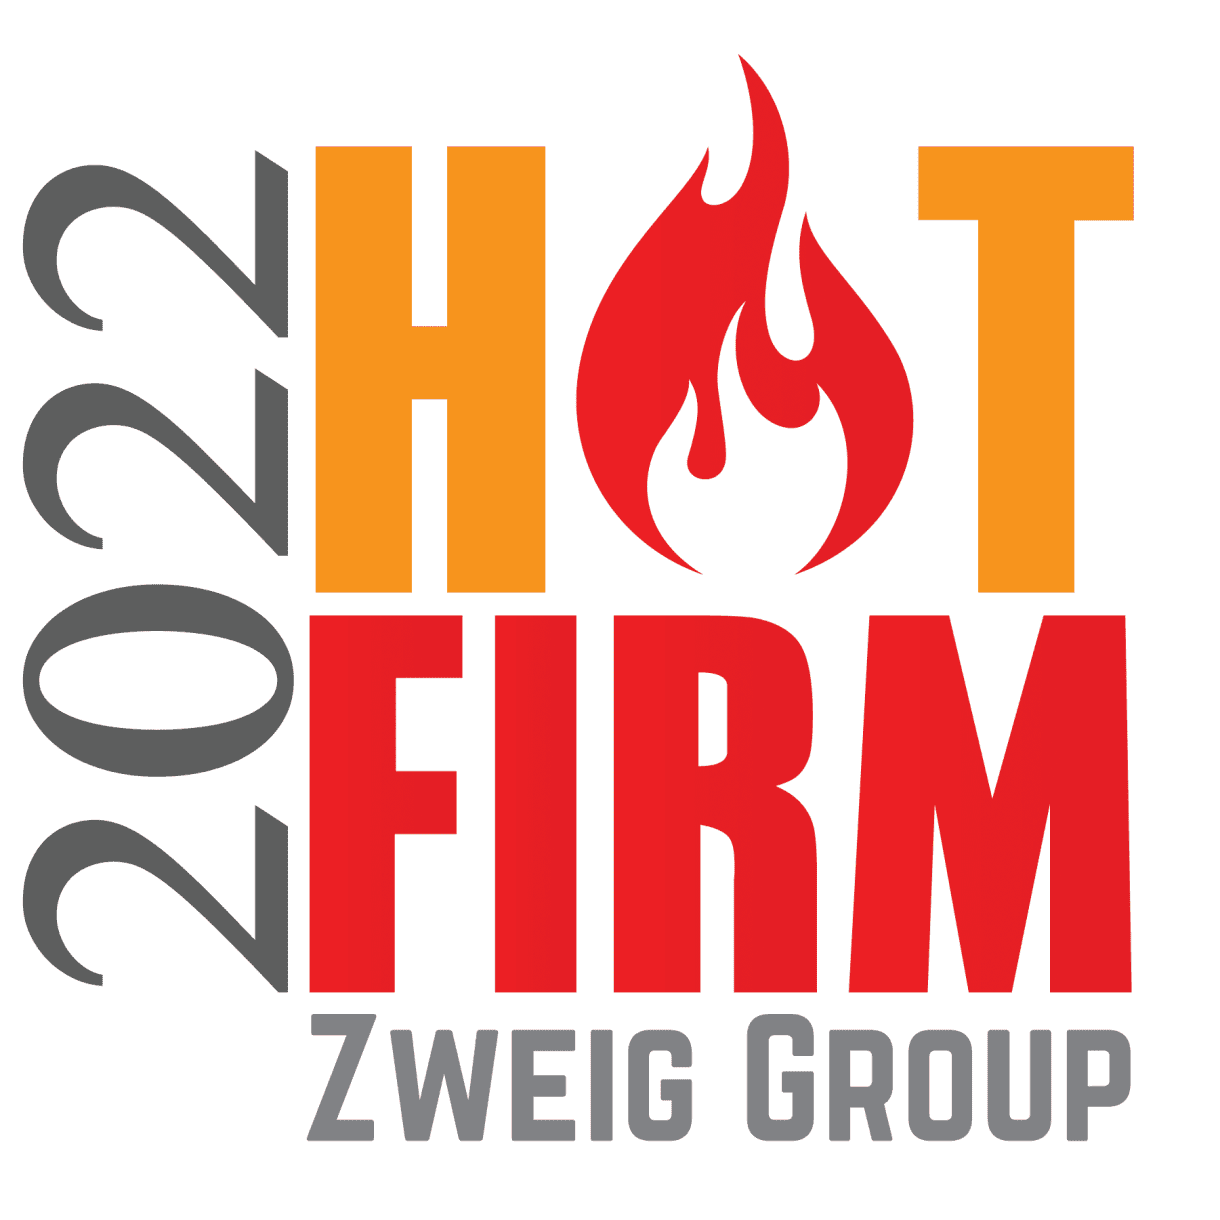 WithersRavenel earns Zweig Hot Firm Award